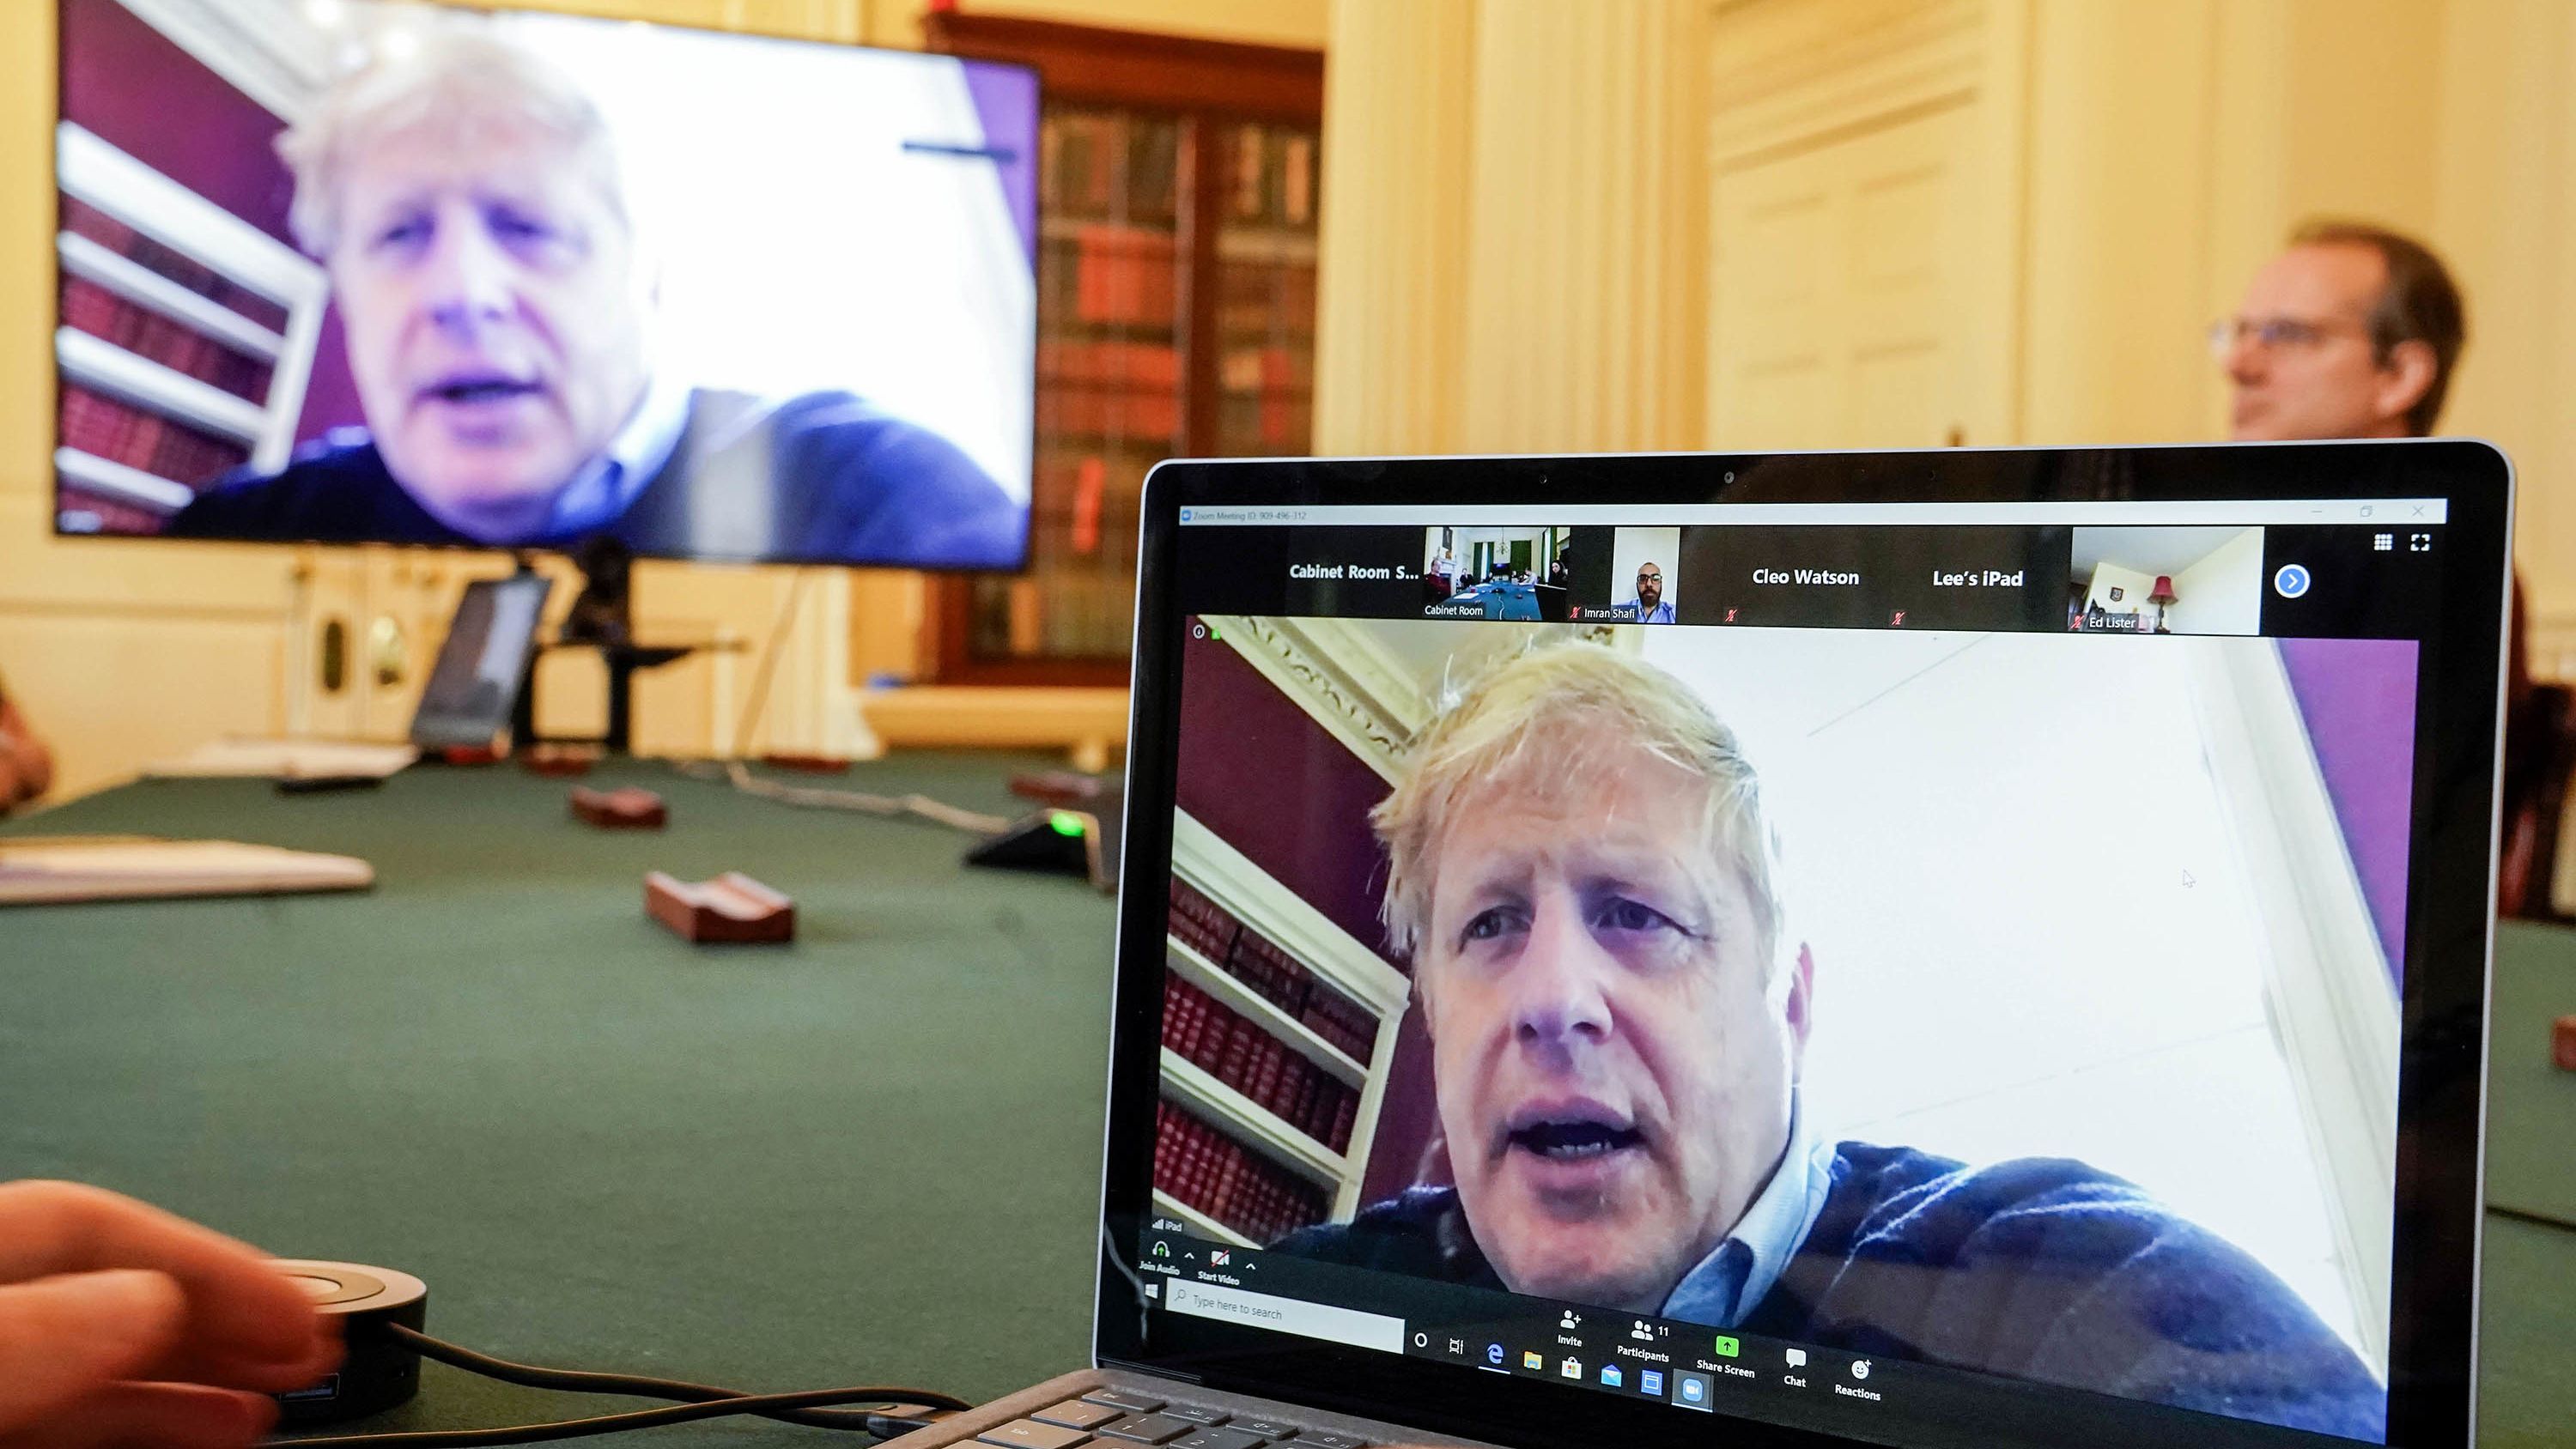 Johnson is seen via video conference as he attends a Covid-19 meeting remotely in March 2020.